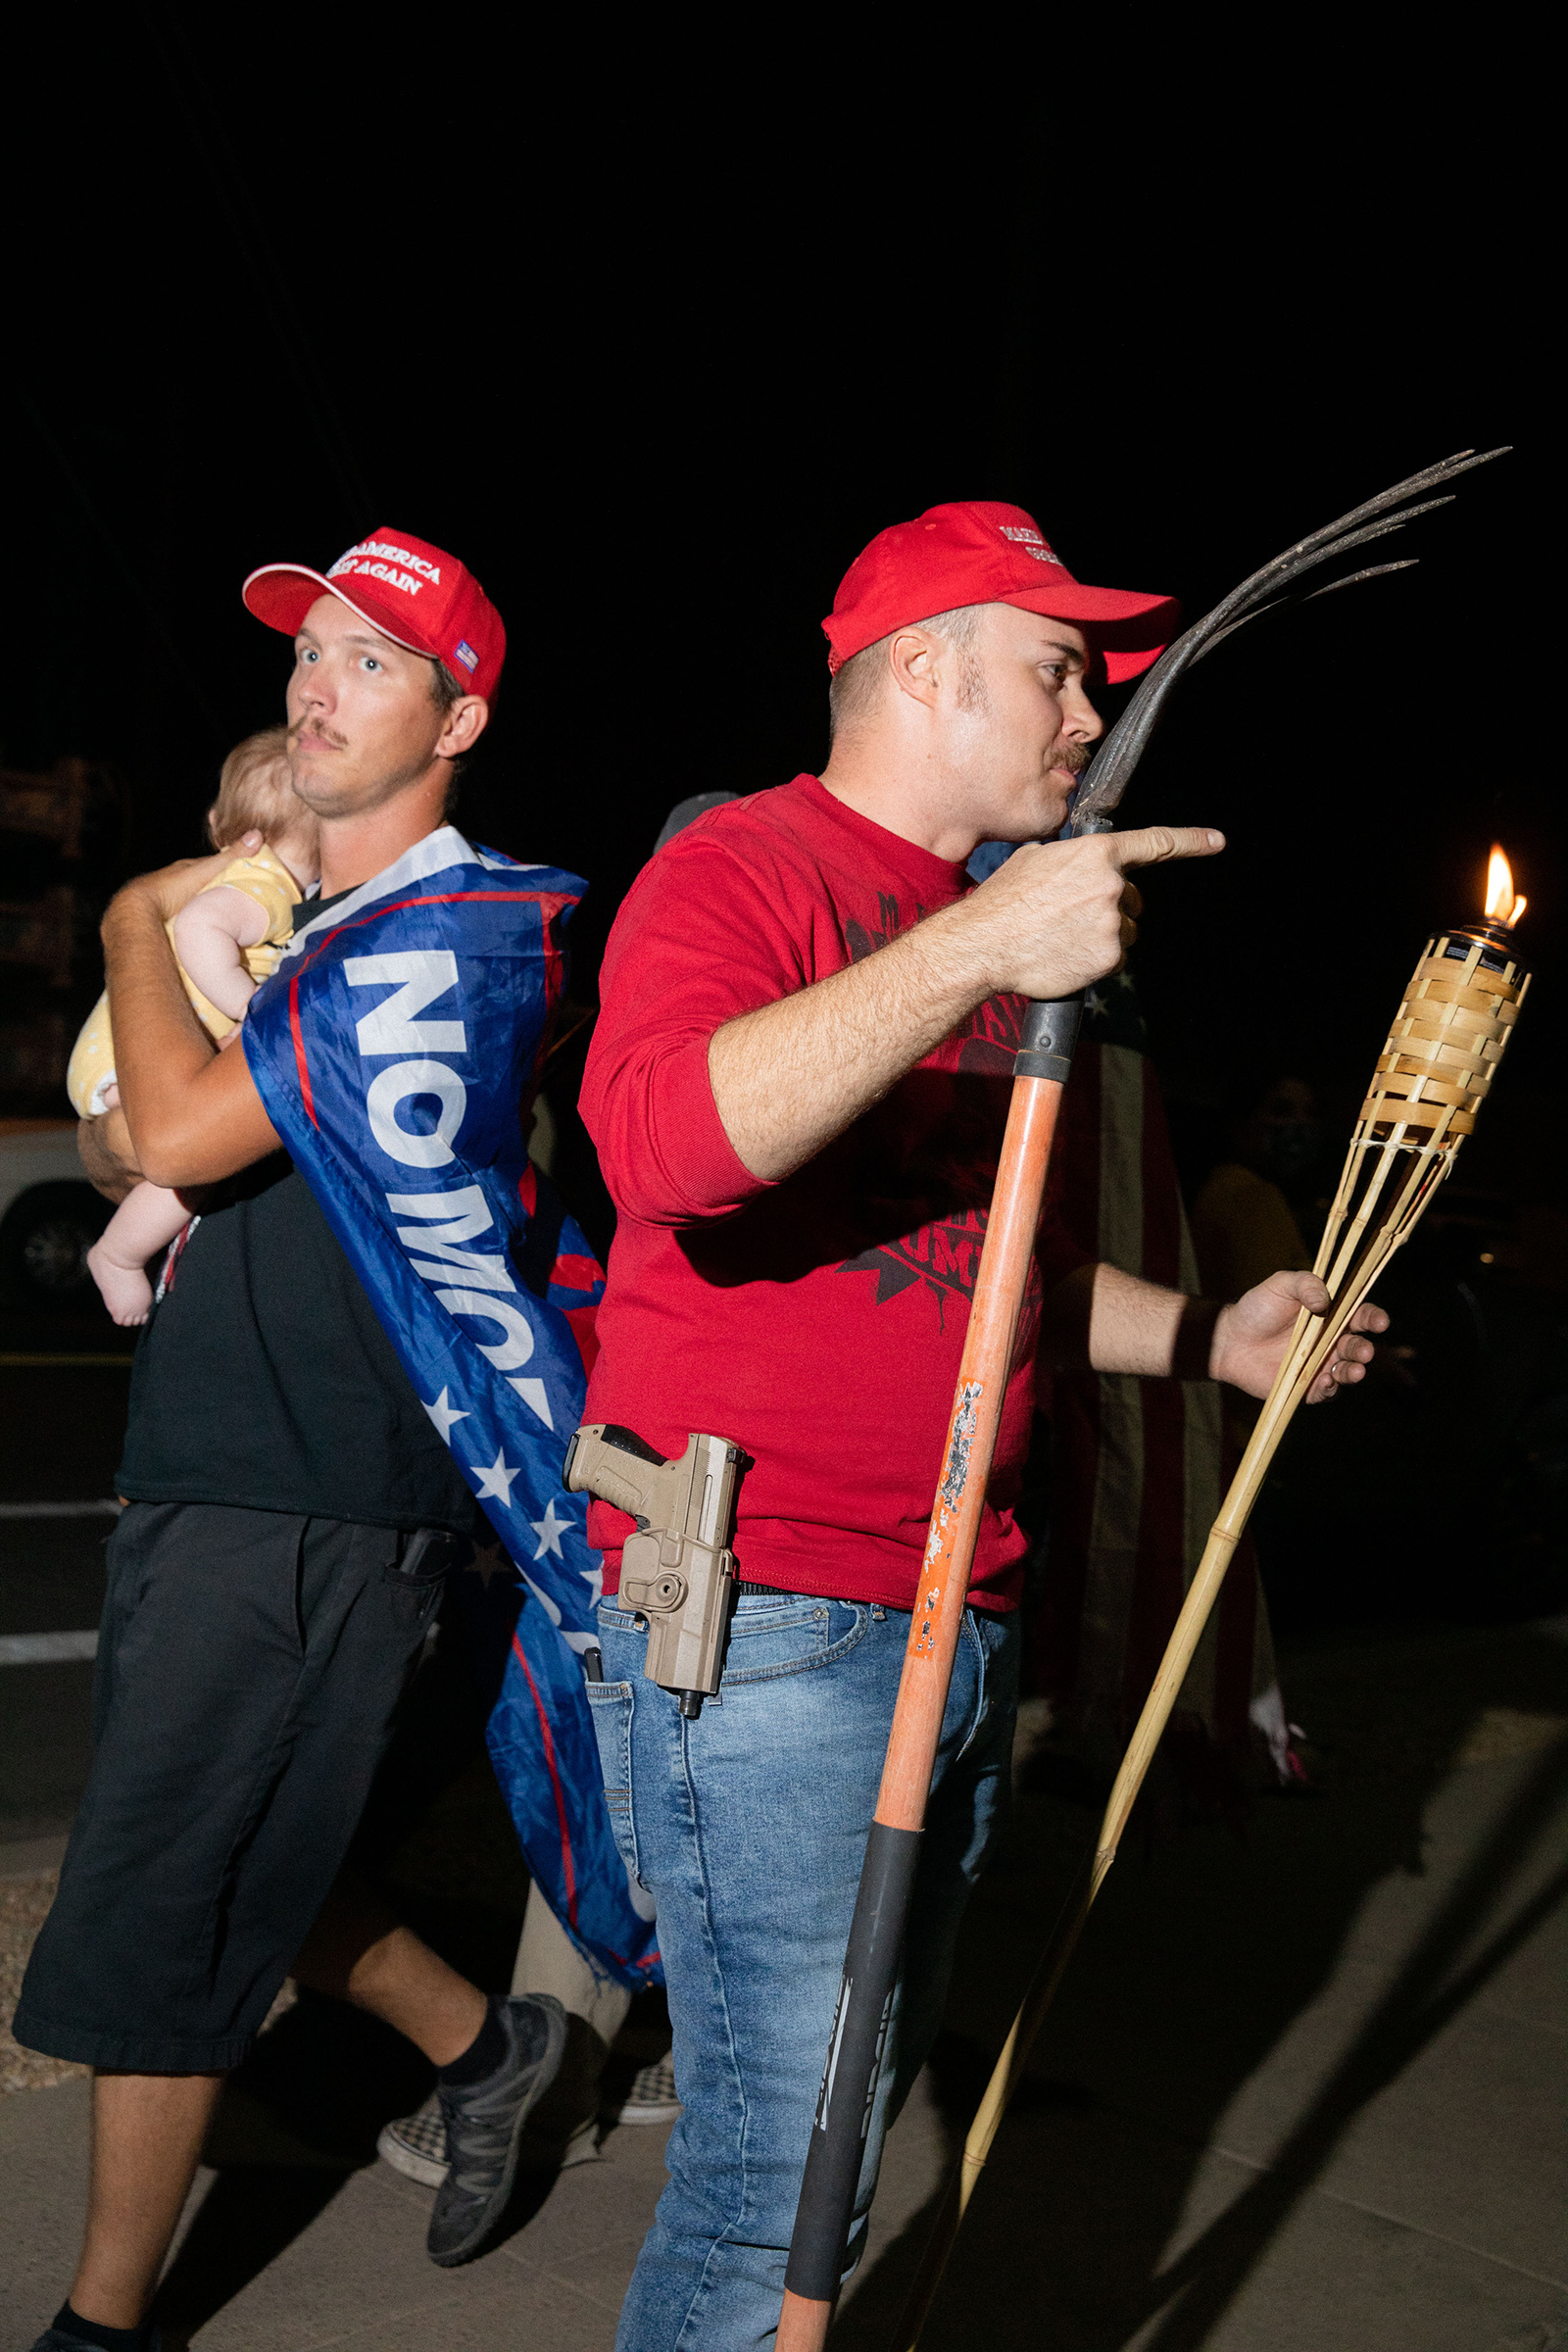 A man holding a child walks by a man with a rake, gun and tiki torch at the Maricopa County election office in Phoenix, Ariz., on Nov. 5. (Sinna Nasseri for TIME)